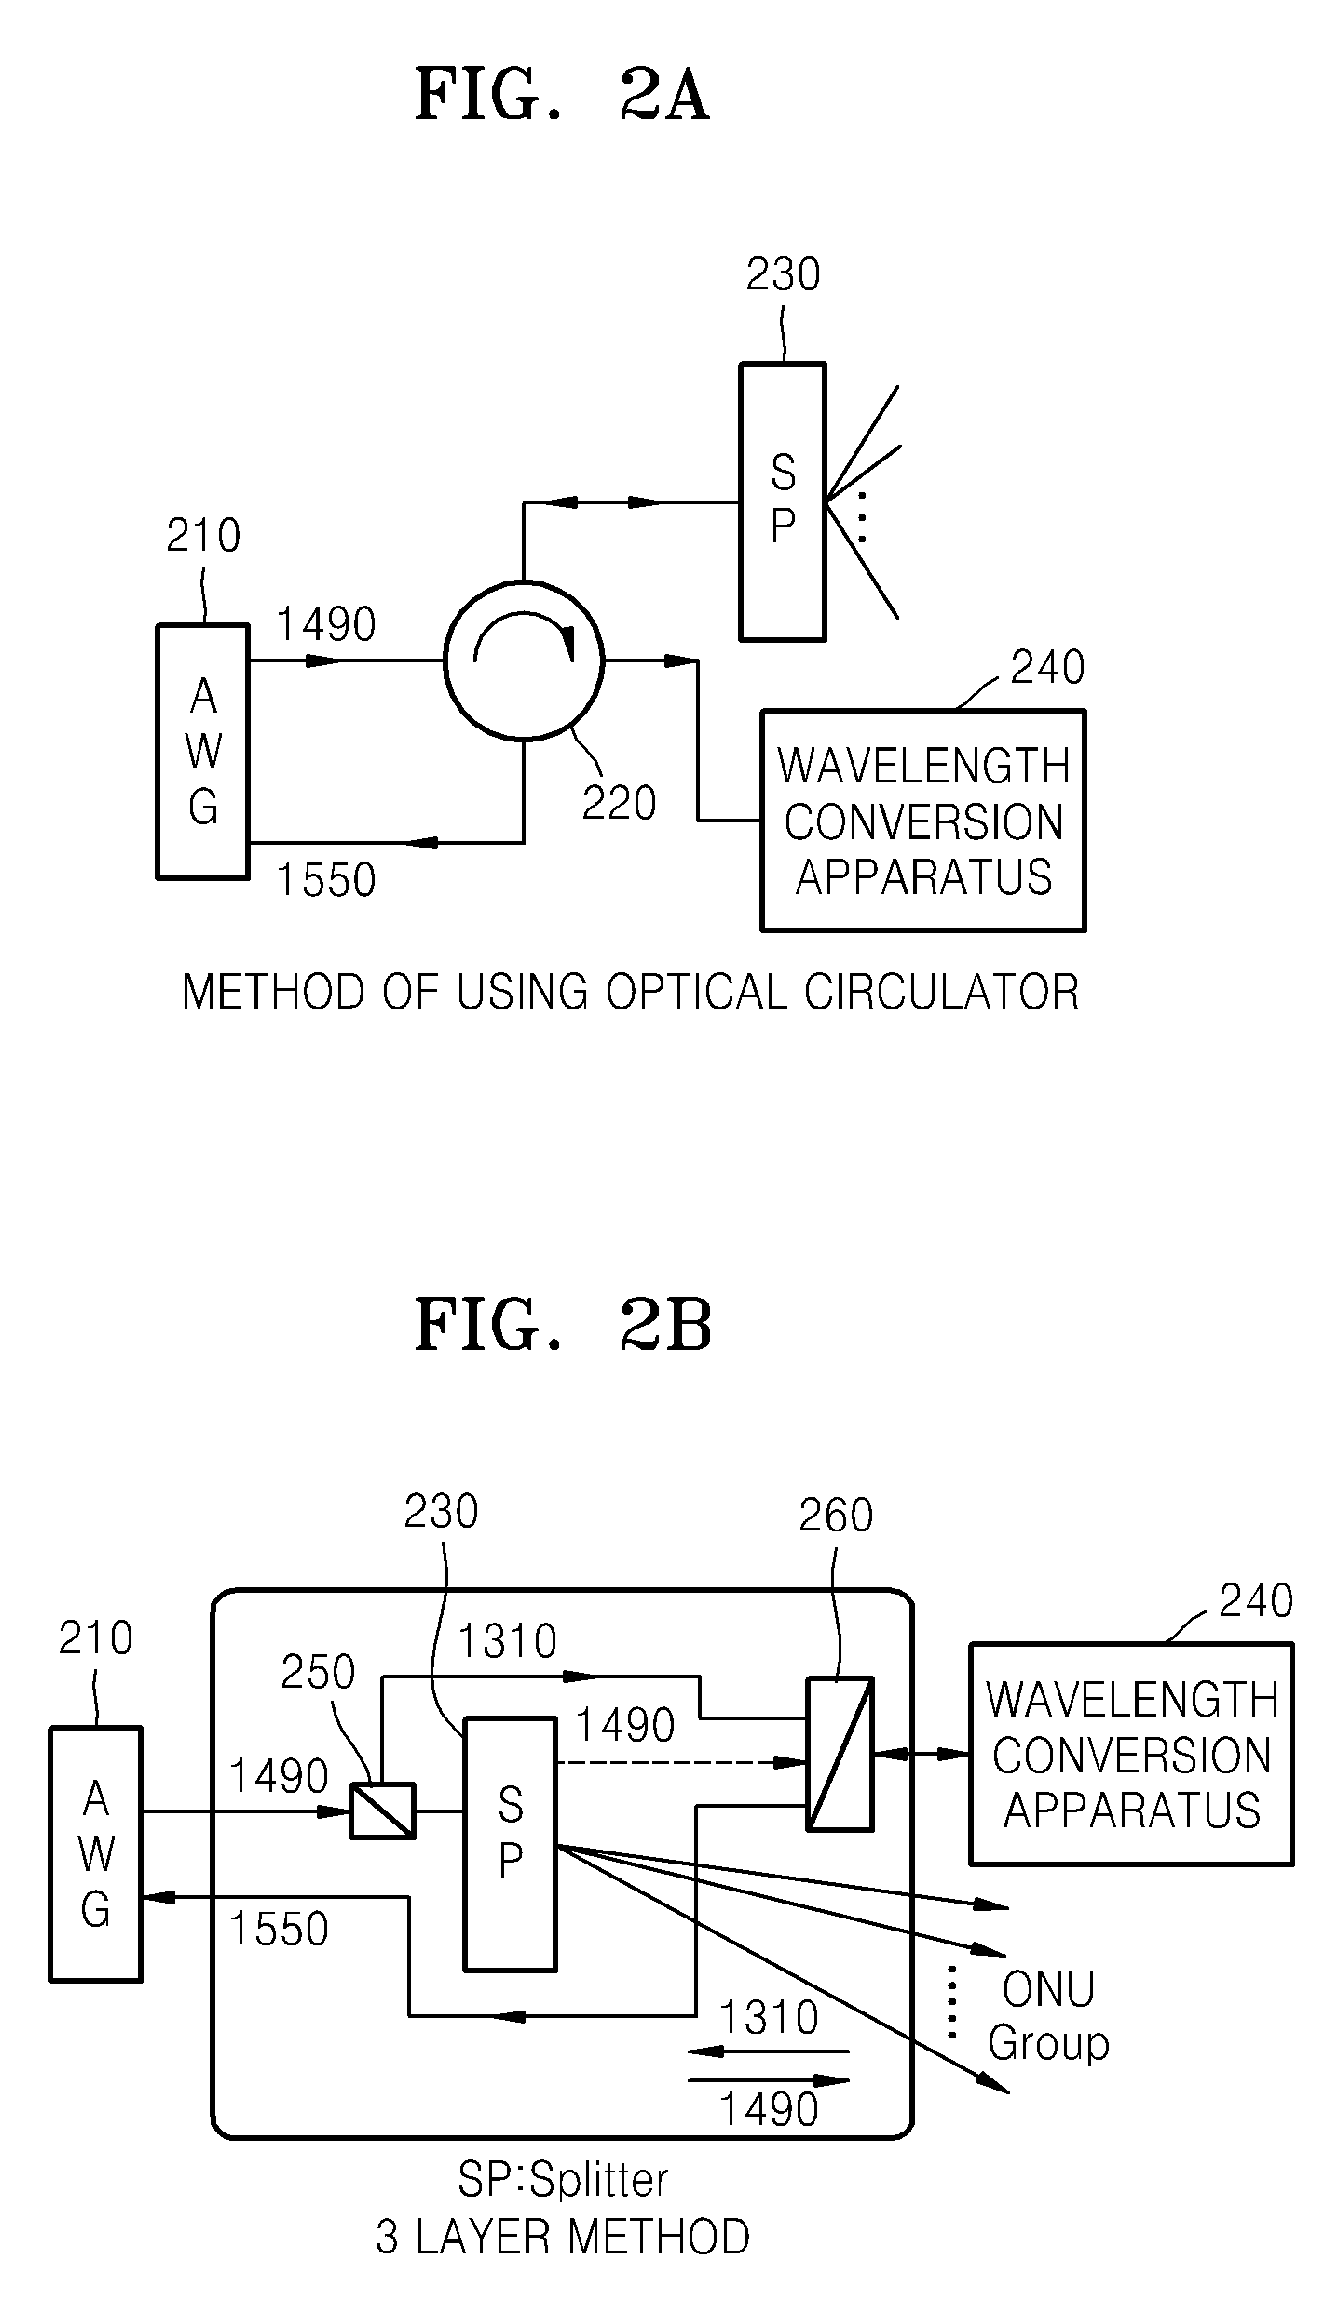 Wavelength conversion apparatus in time division multiplexing -passive optical network sytem based on wavelength division multiplexing system, and optical transmission apparatus and method using the same